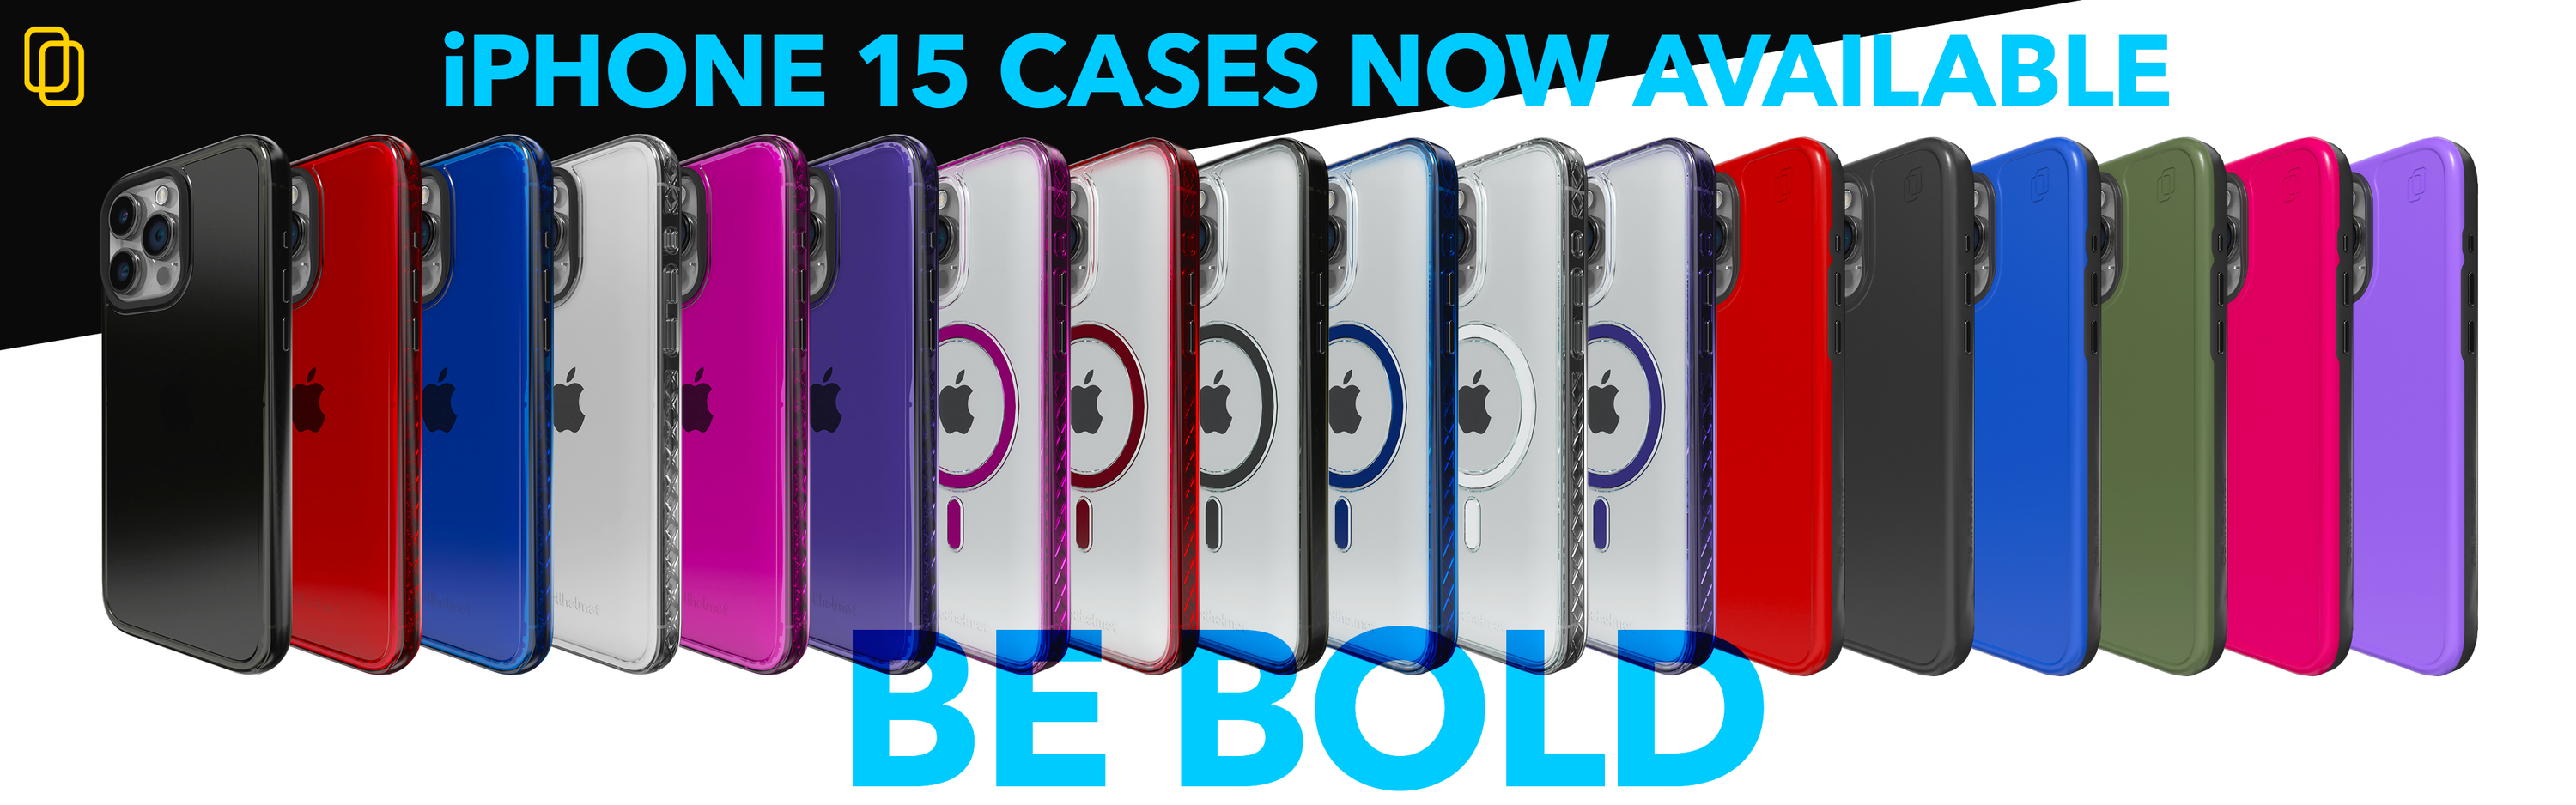 iPhone 15. cases now available for iPhone 15, iphone 15 Pro, iPhone 15 Plus and iPhone 15 Pro Max. Click to shop.